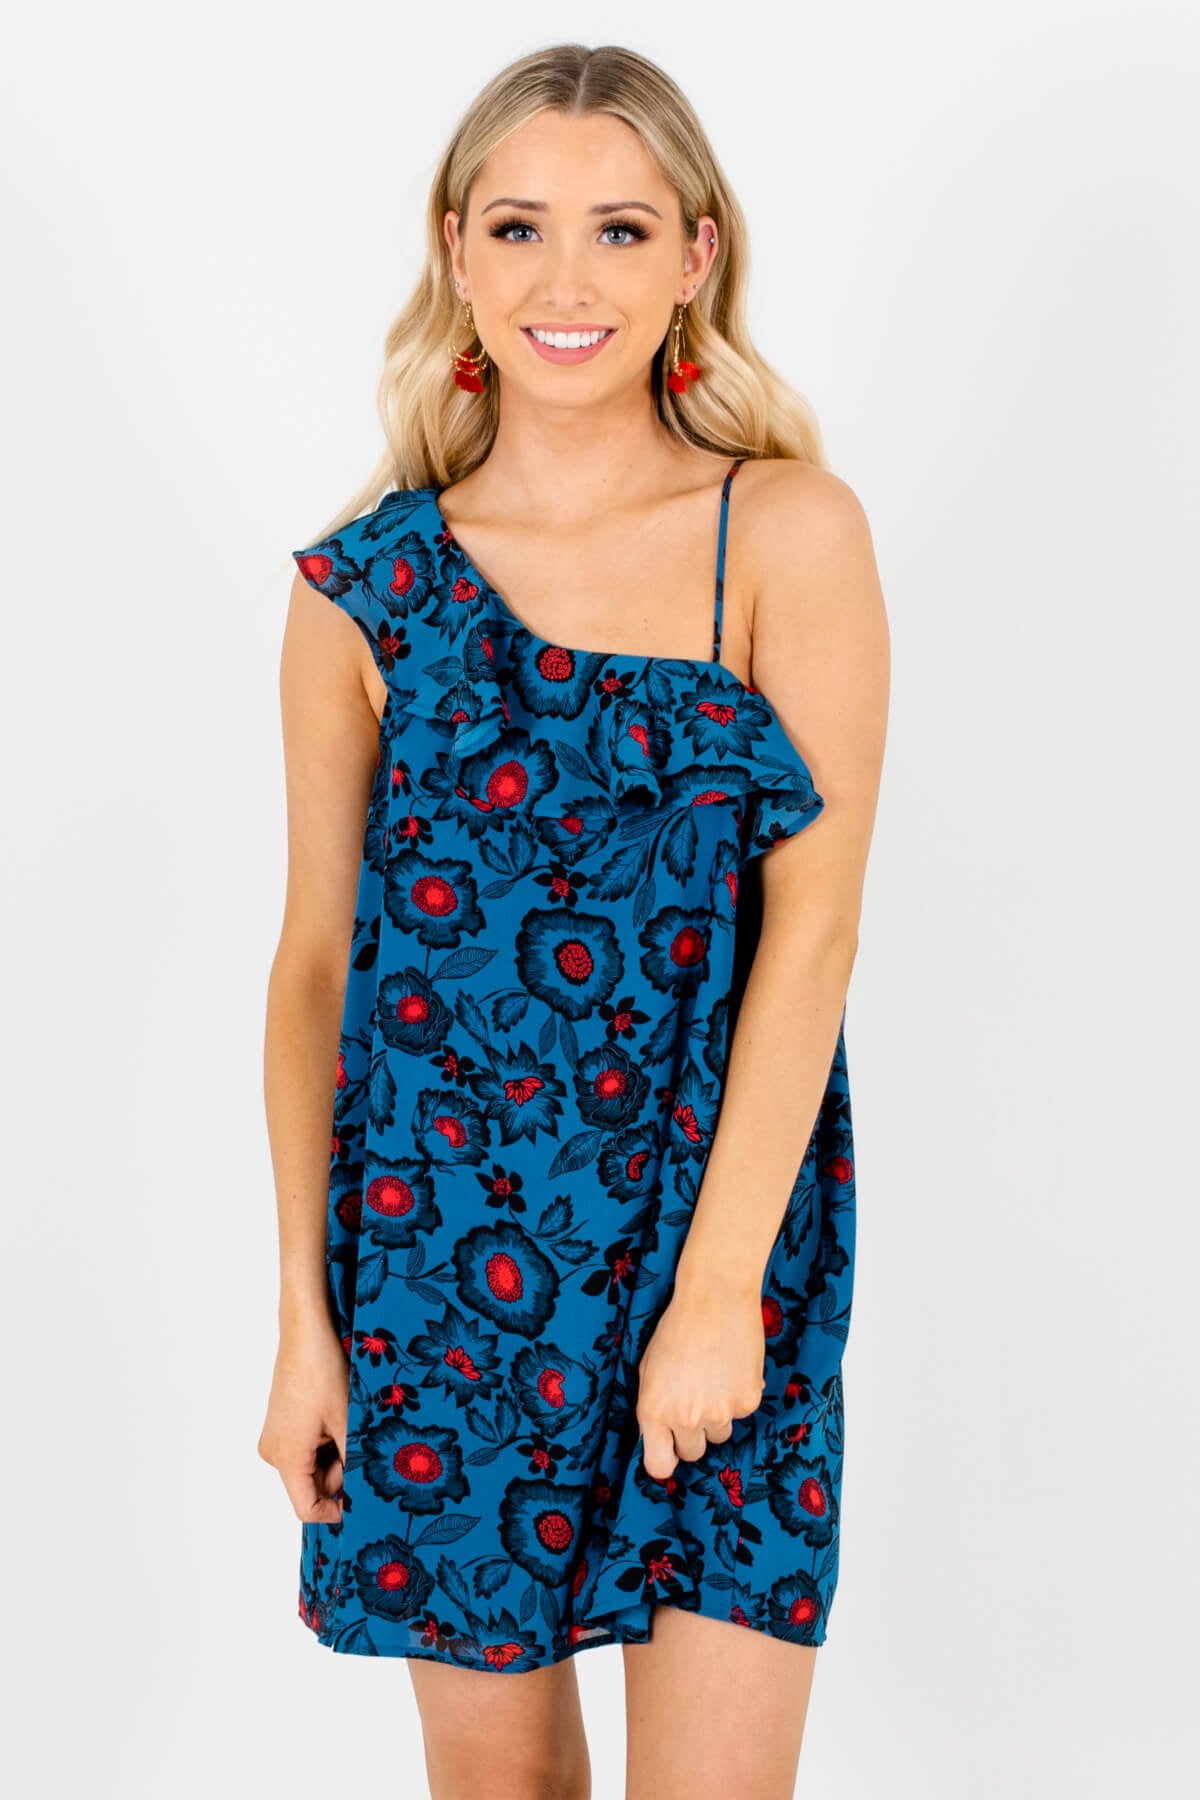 Teal Blue Floral Cute and Comfortable Boutique Mini Dresses for Women